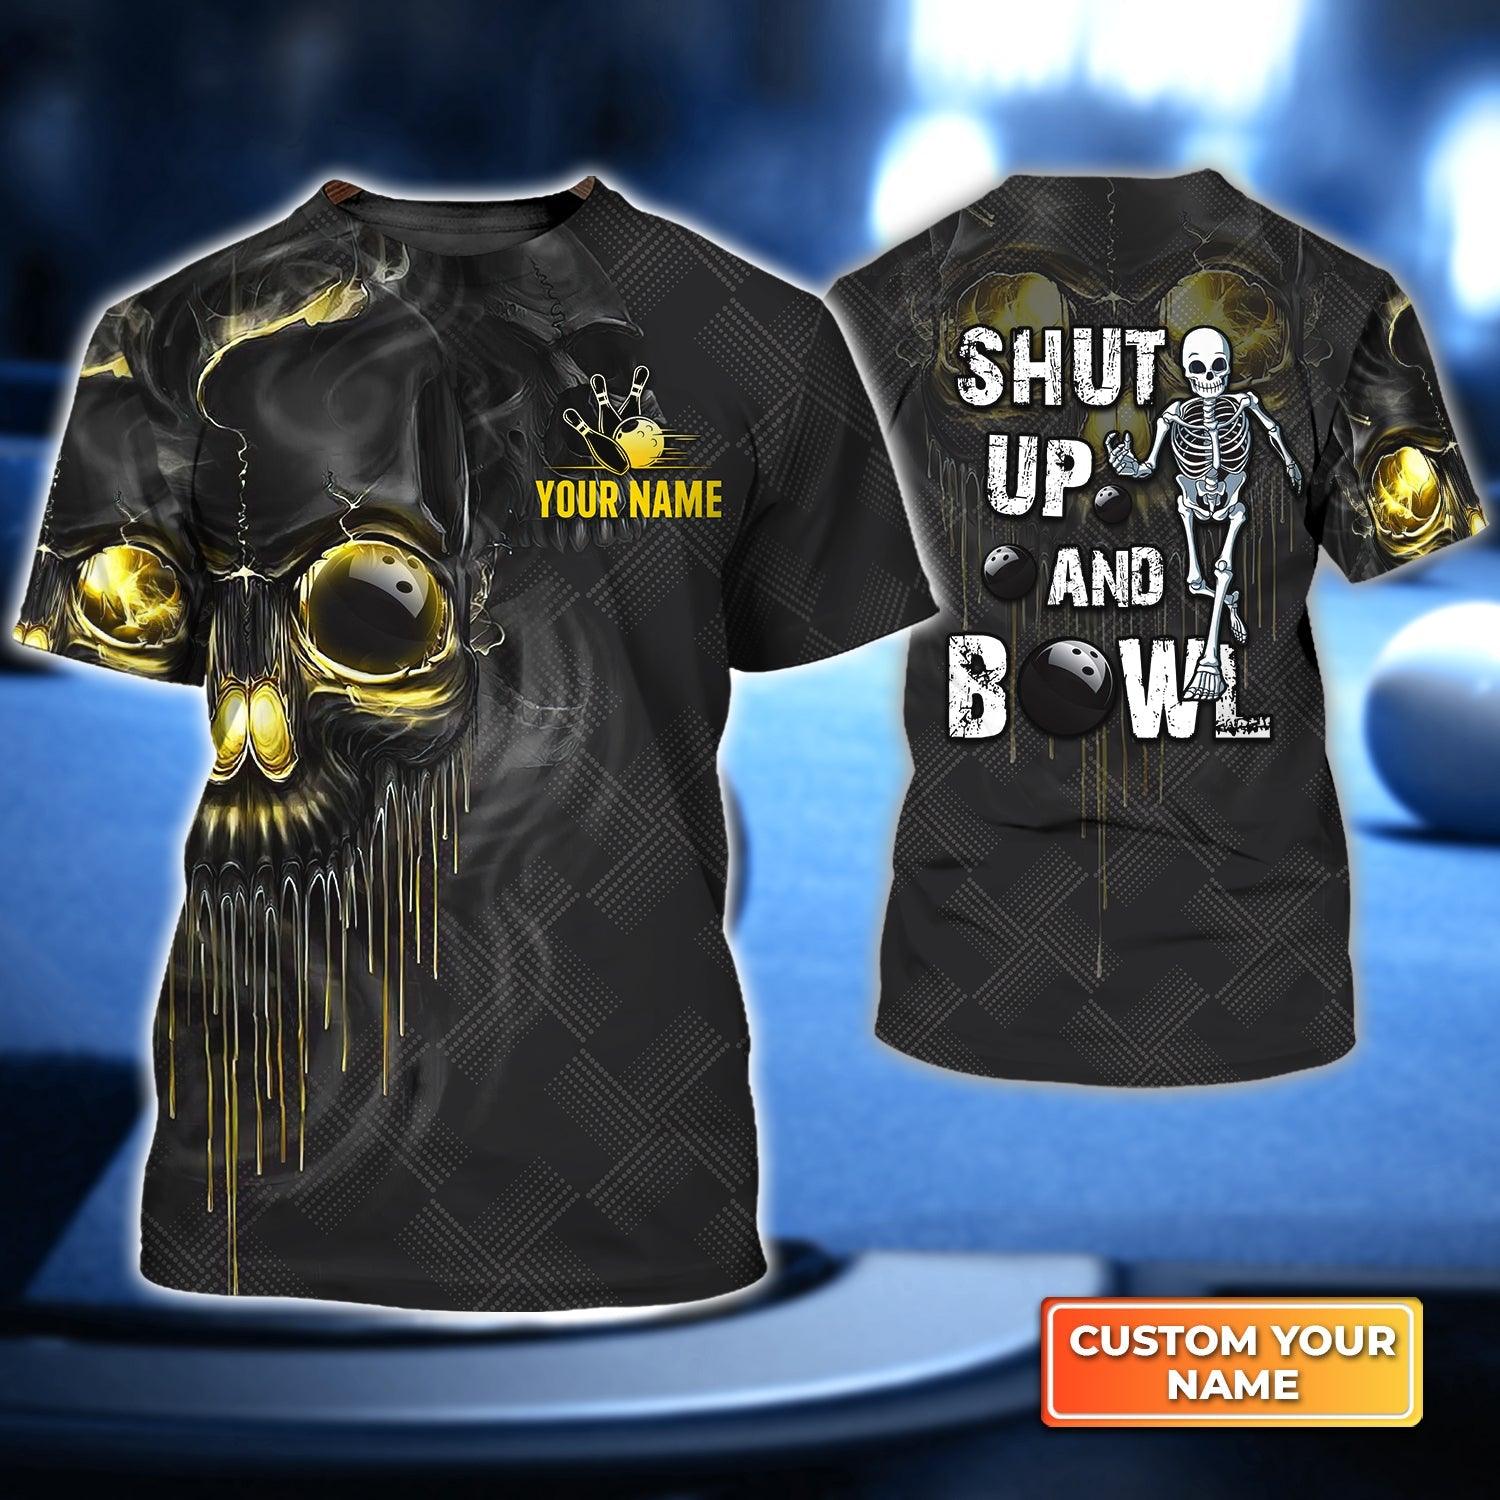 Bowling Custom Name T Shirt, Shut Up And Bowl Golden Skull Personalized T-Shirt For Men, Perfect Gift For Bowling Lovers, Bowlers, Team, Friend - Amzanimalsgift